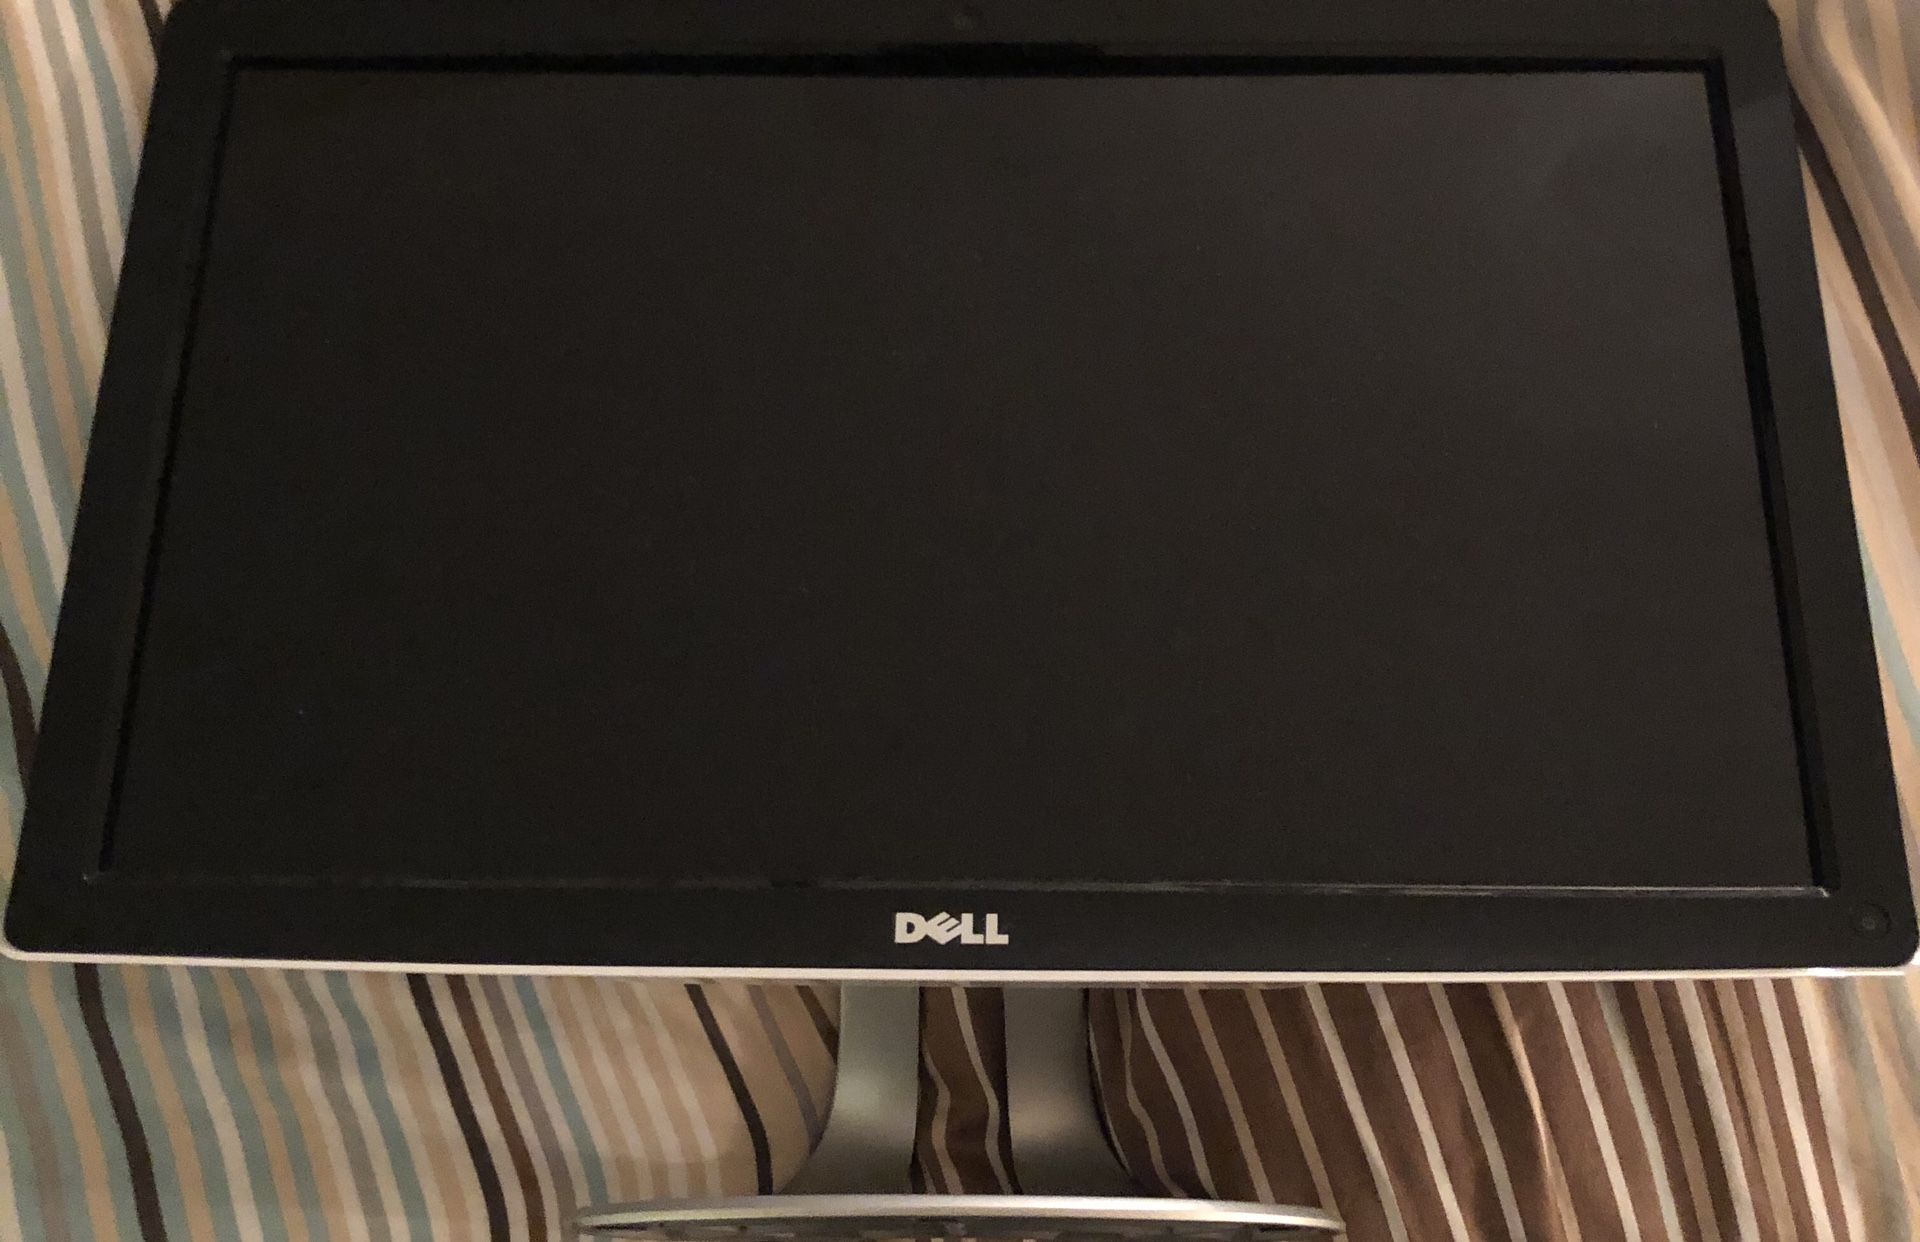 Dell 22” inch monitor (set of 2)